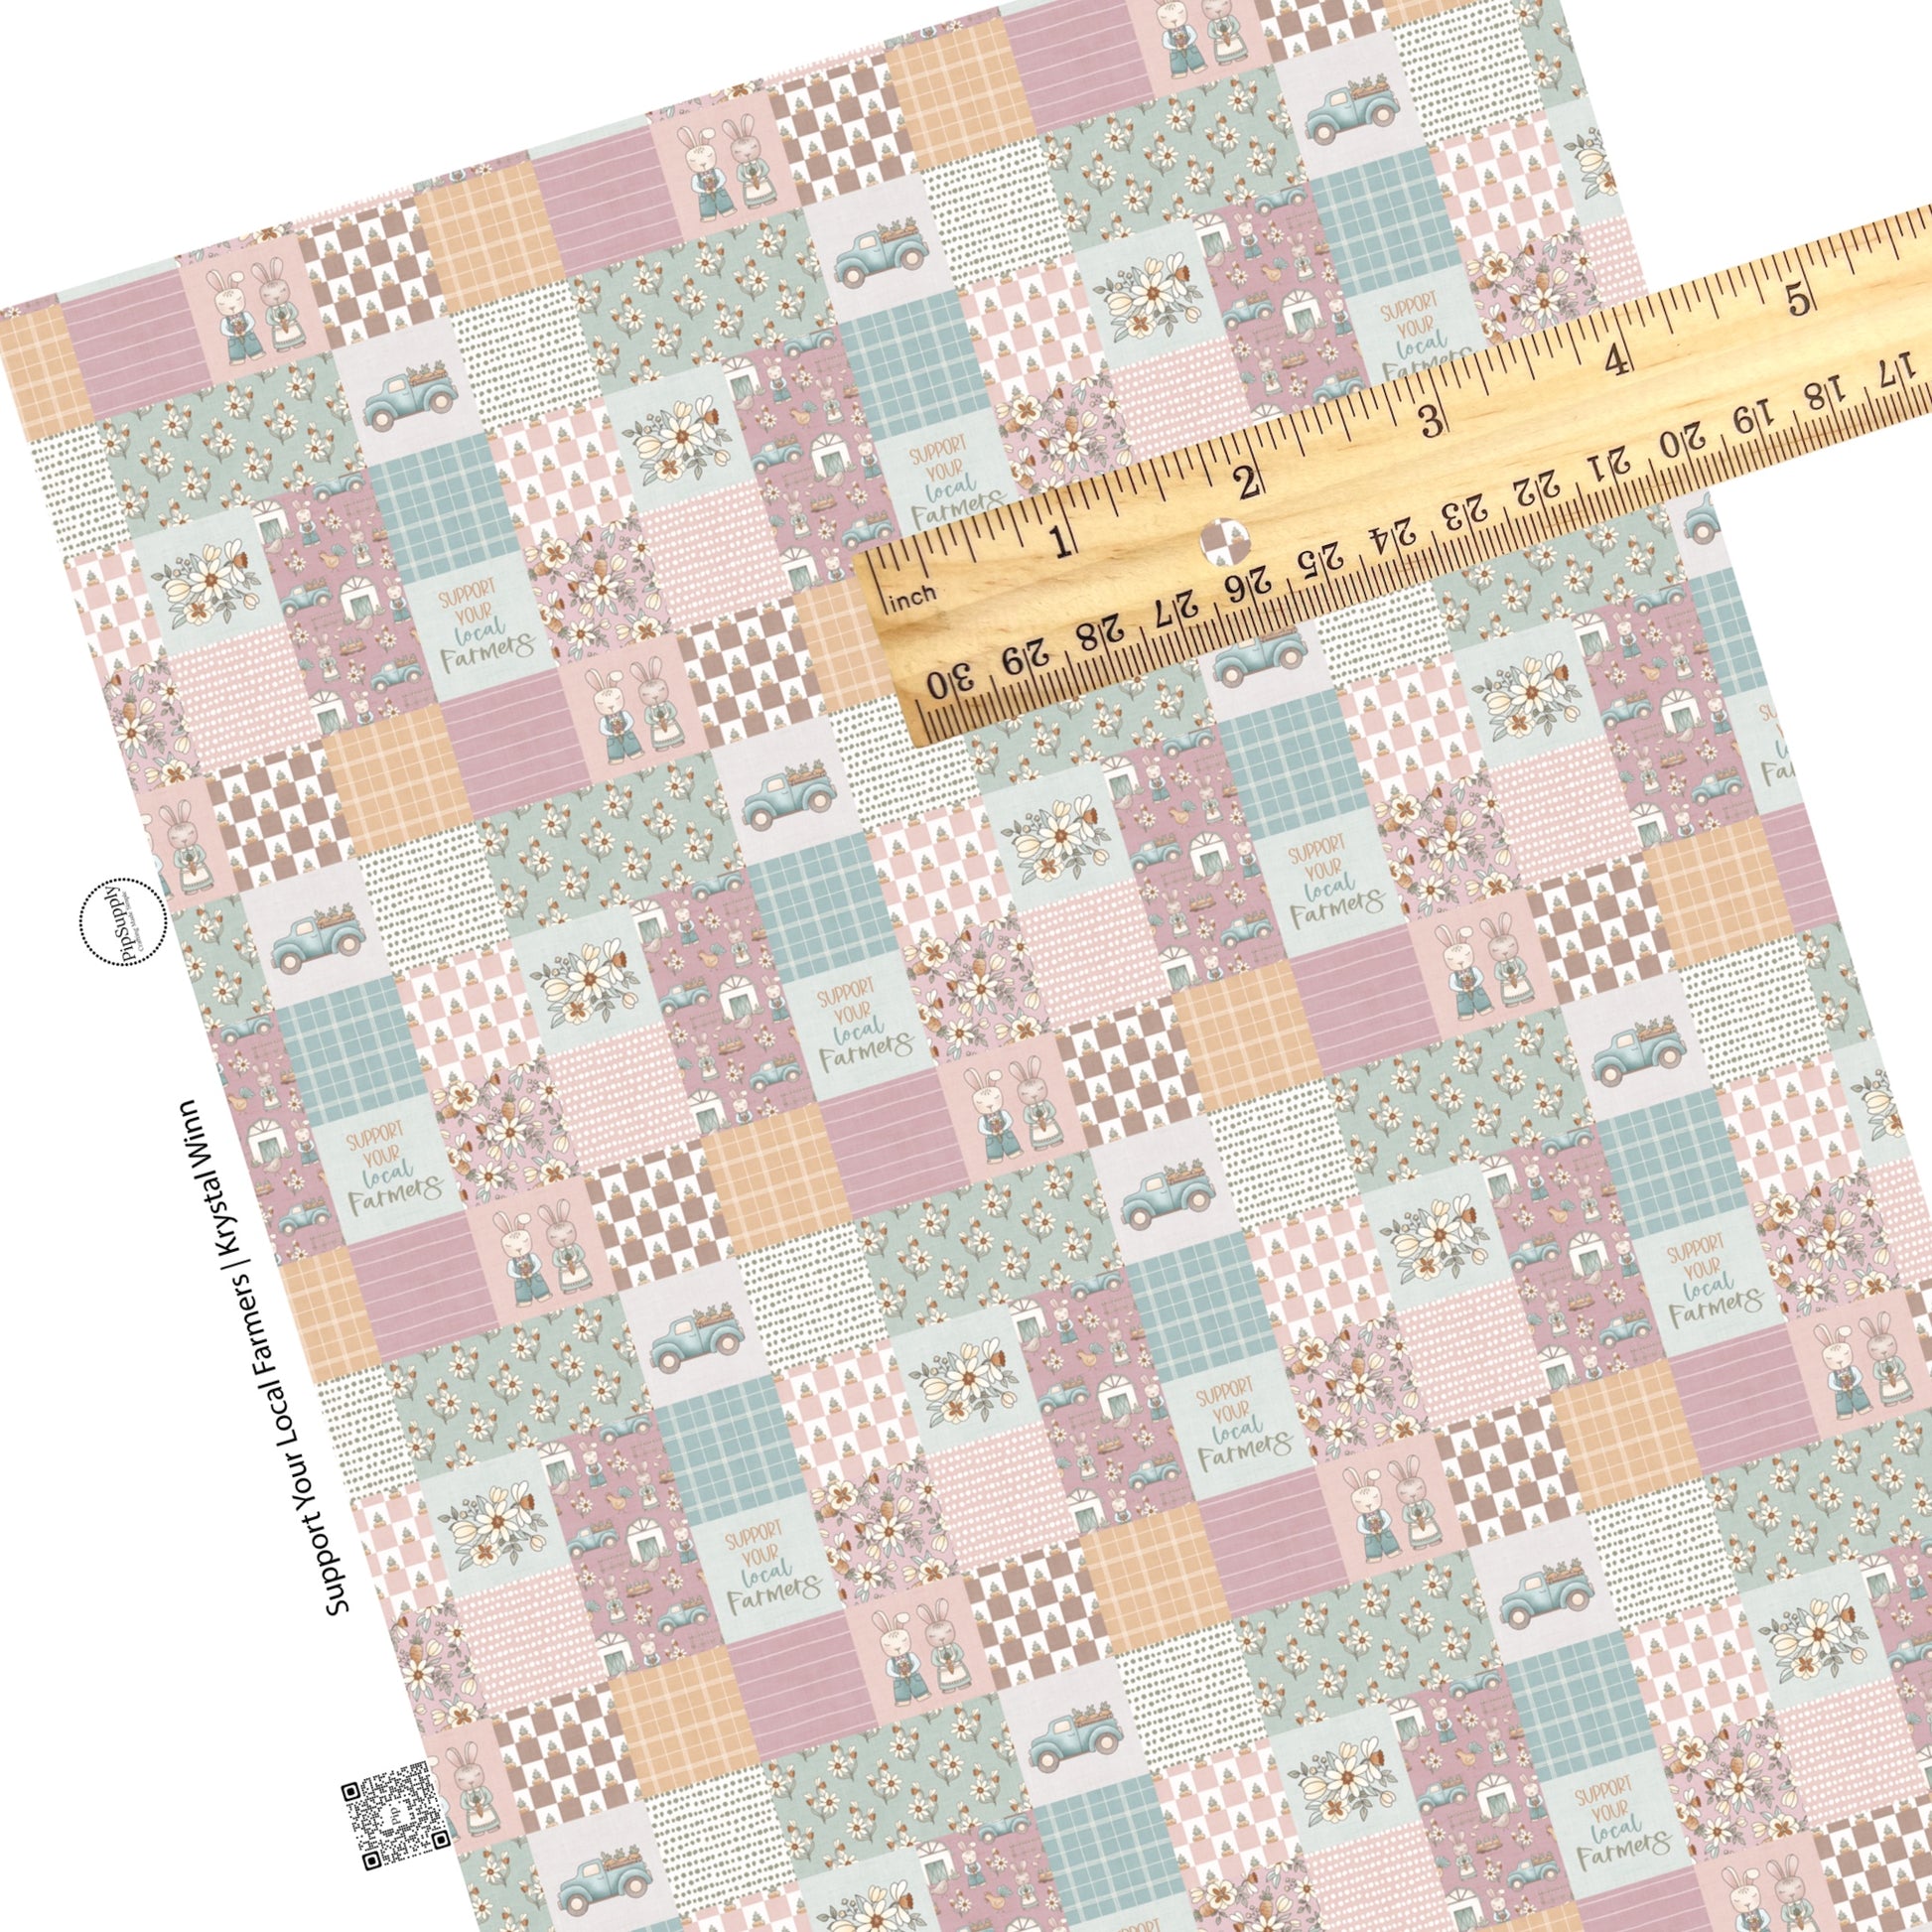 These spring checkered pattern themed faux leather sheets contain the following design elements: spring farm checkered pattern. Our CPSIA compliant faux leather sheets or rolls can be used for all types of crafting projects.